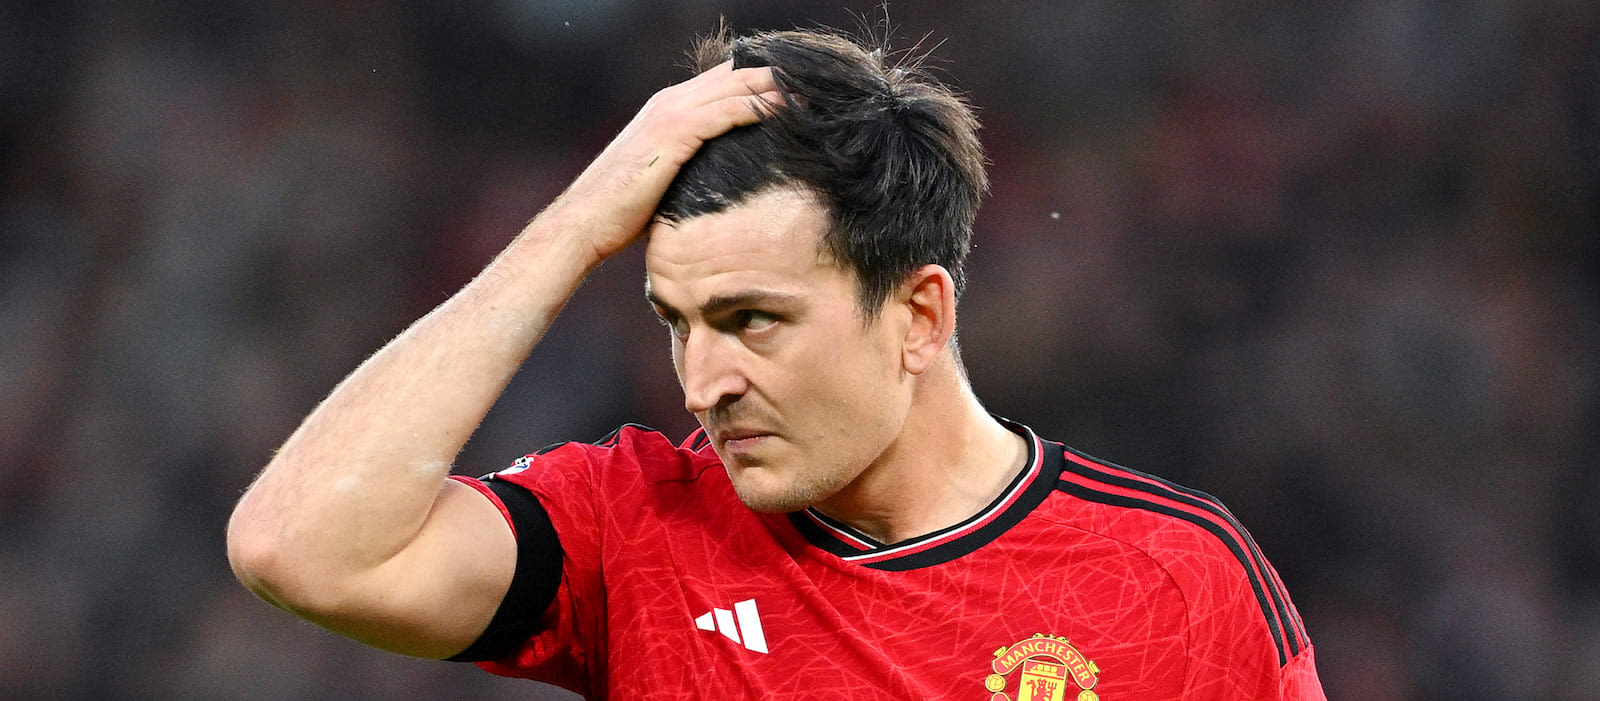 Man United “offer” Harry Maguire to Barcelona as part of ongoing “historic squad clean-up”